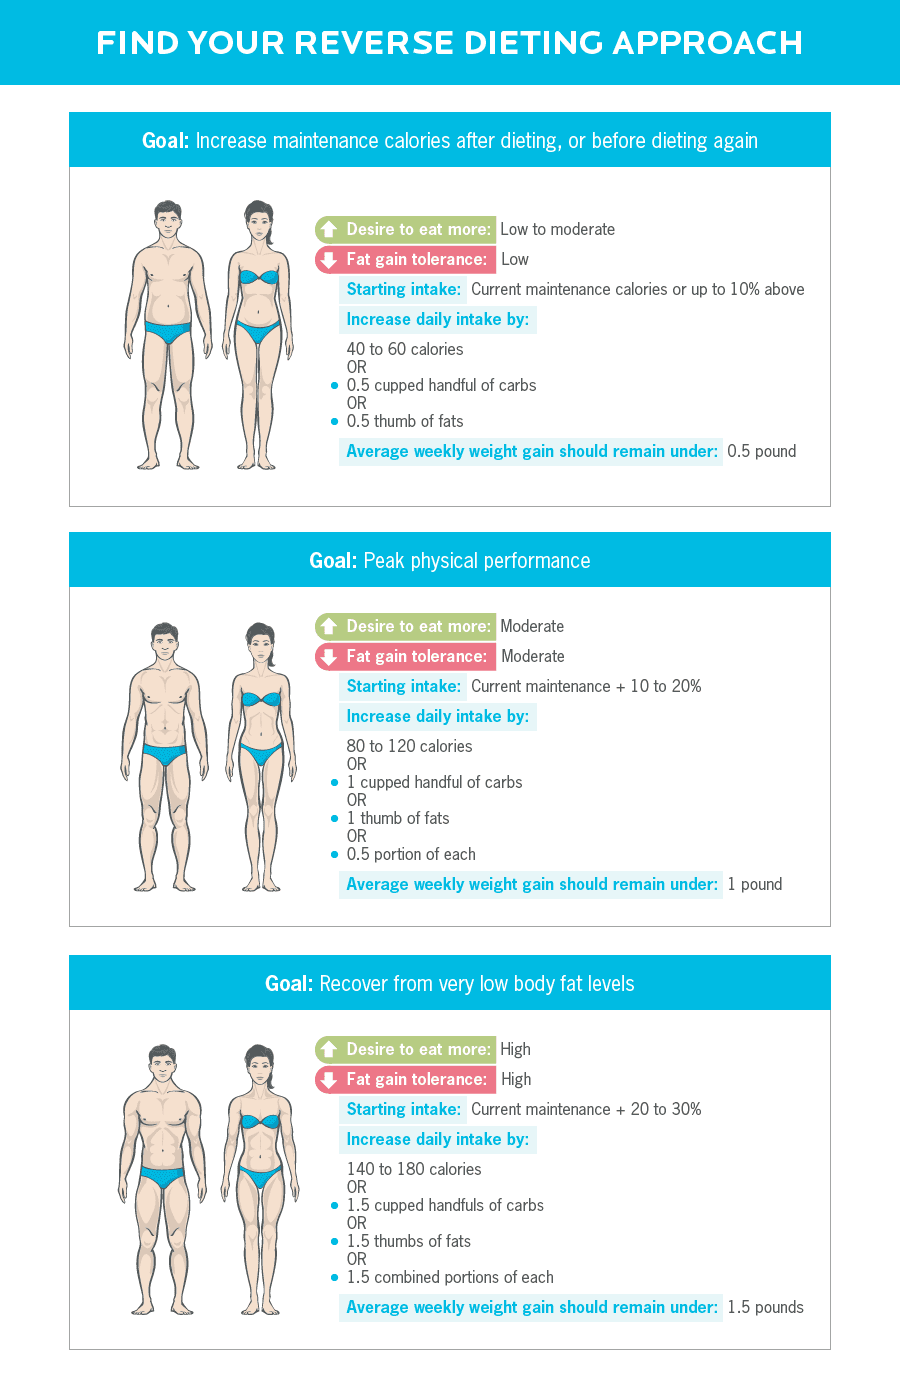 Infographic showing how to apply reverse dieting based on specific goals.